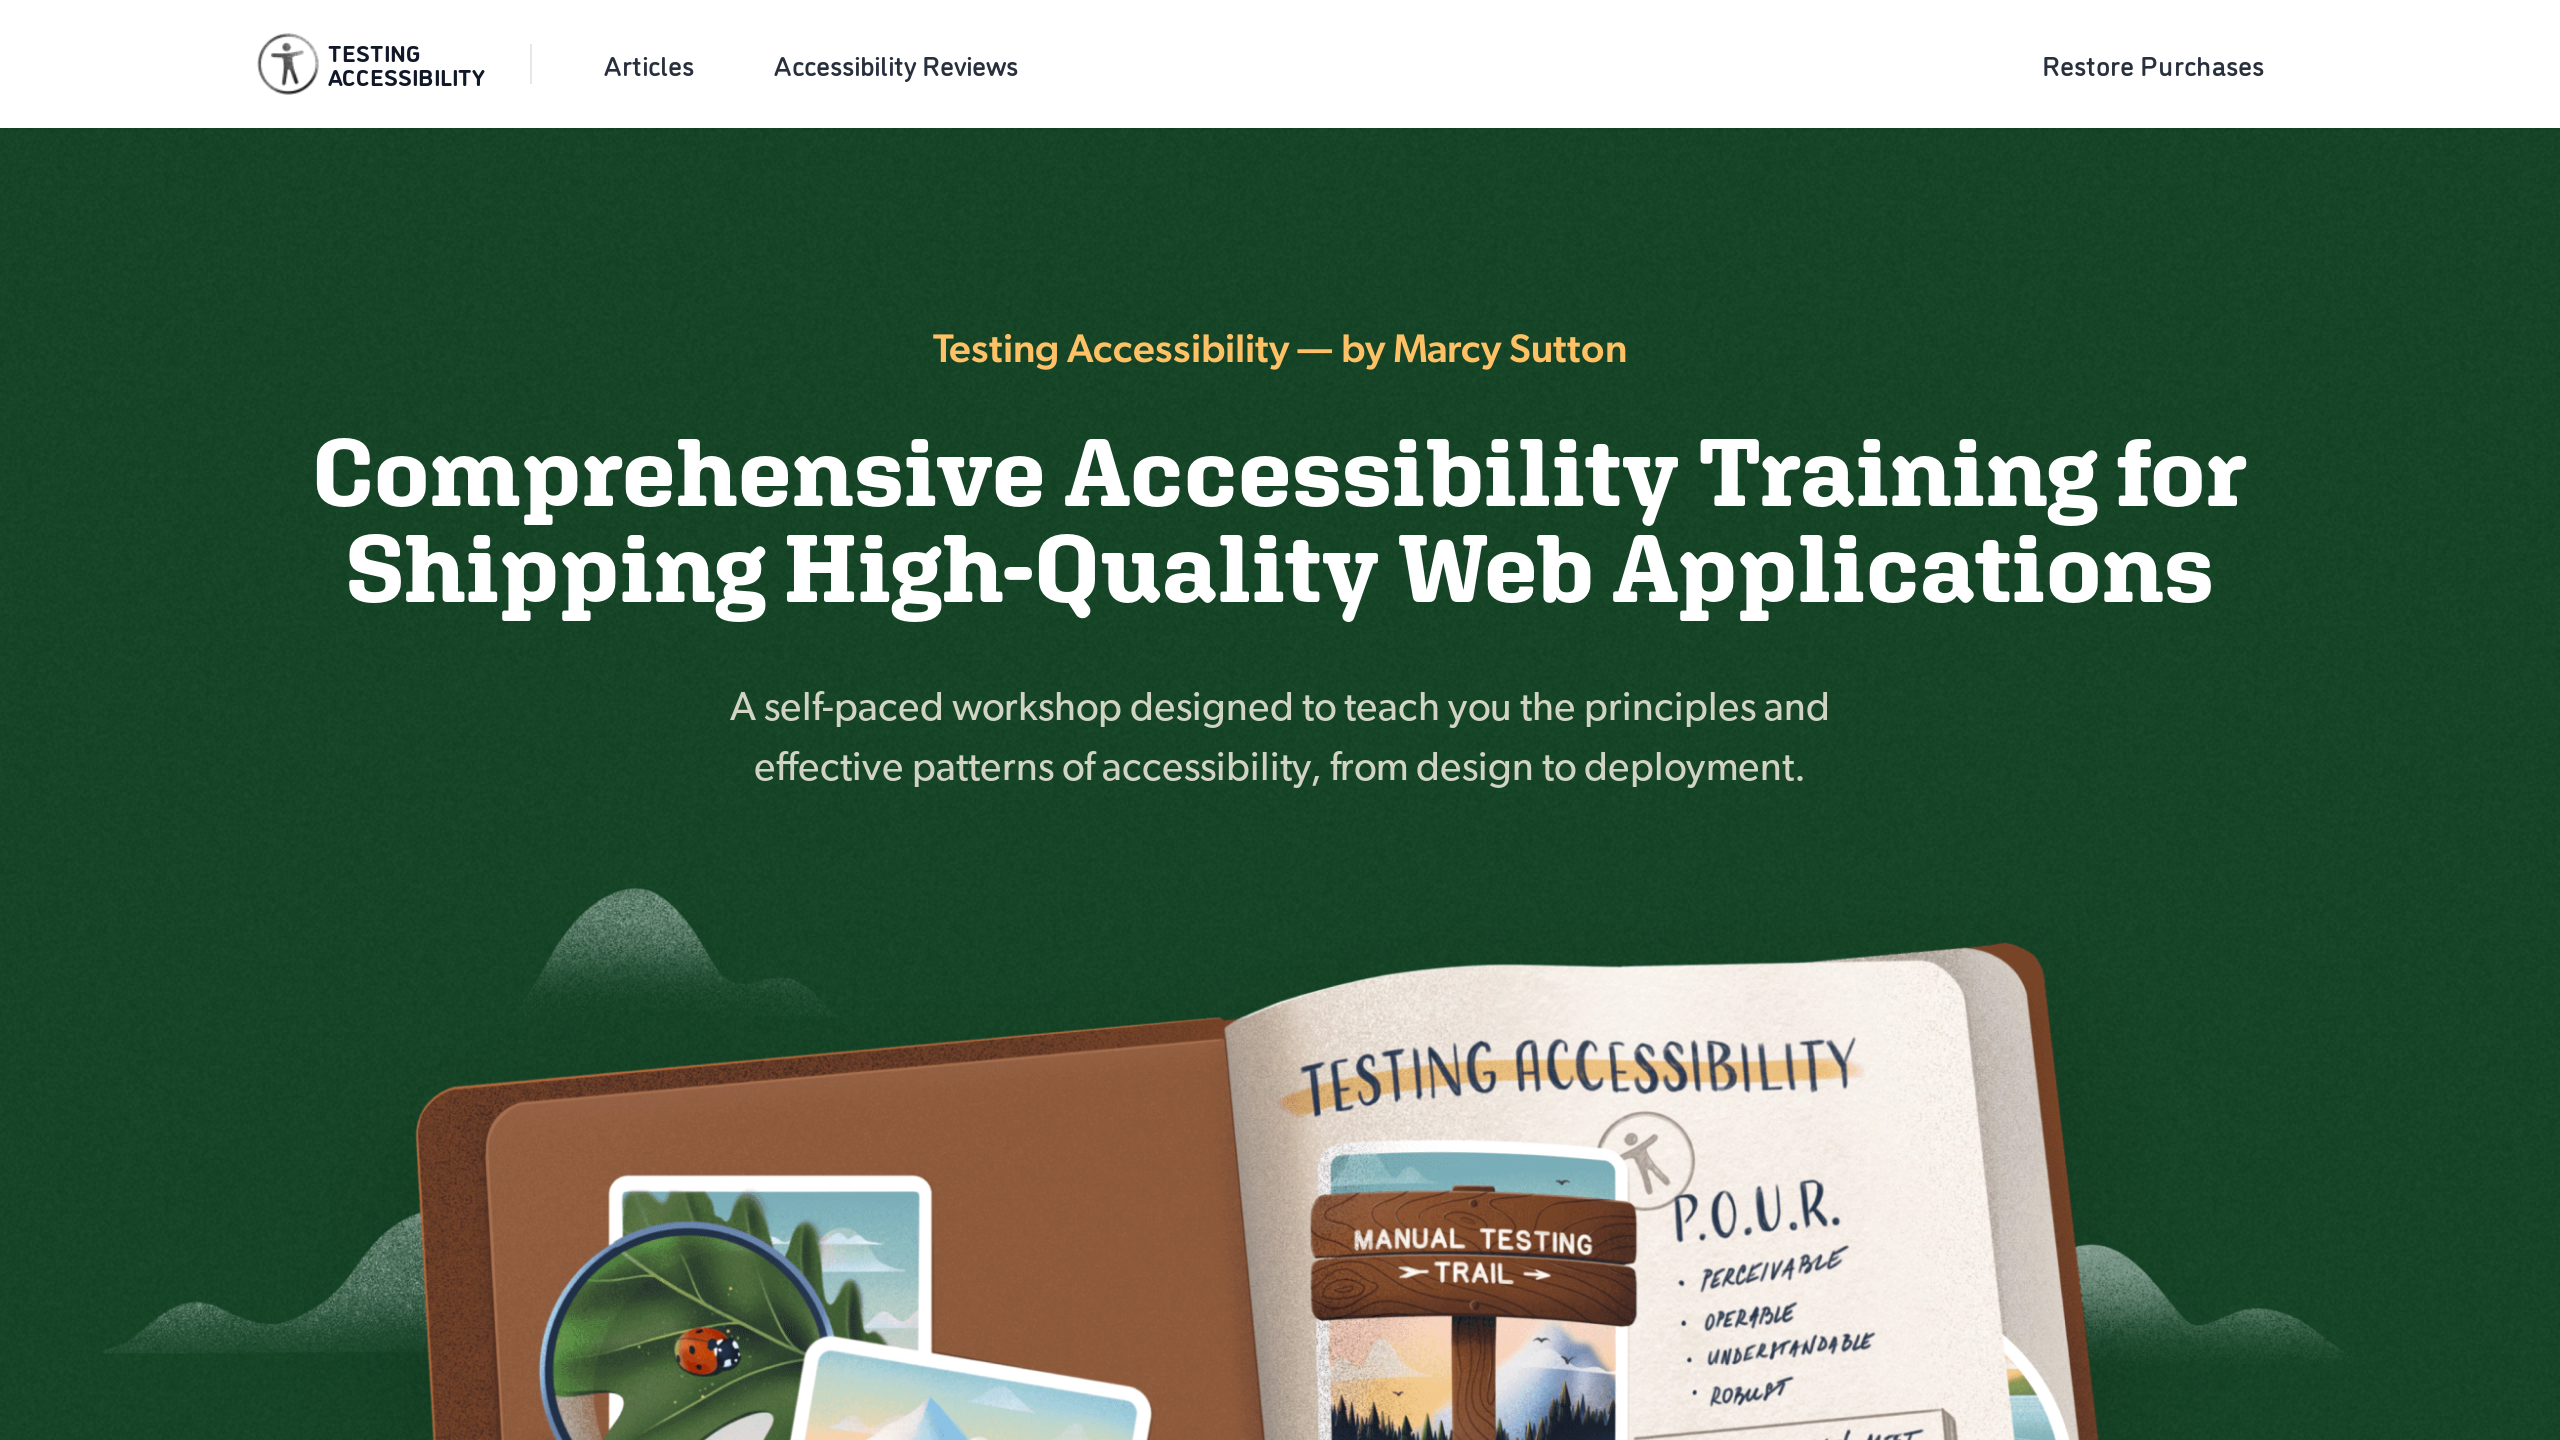 Testing Accessibility's website screenshot